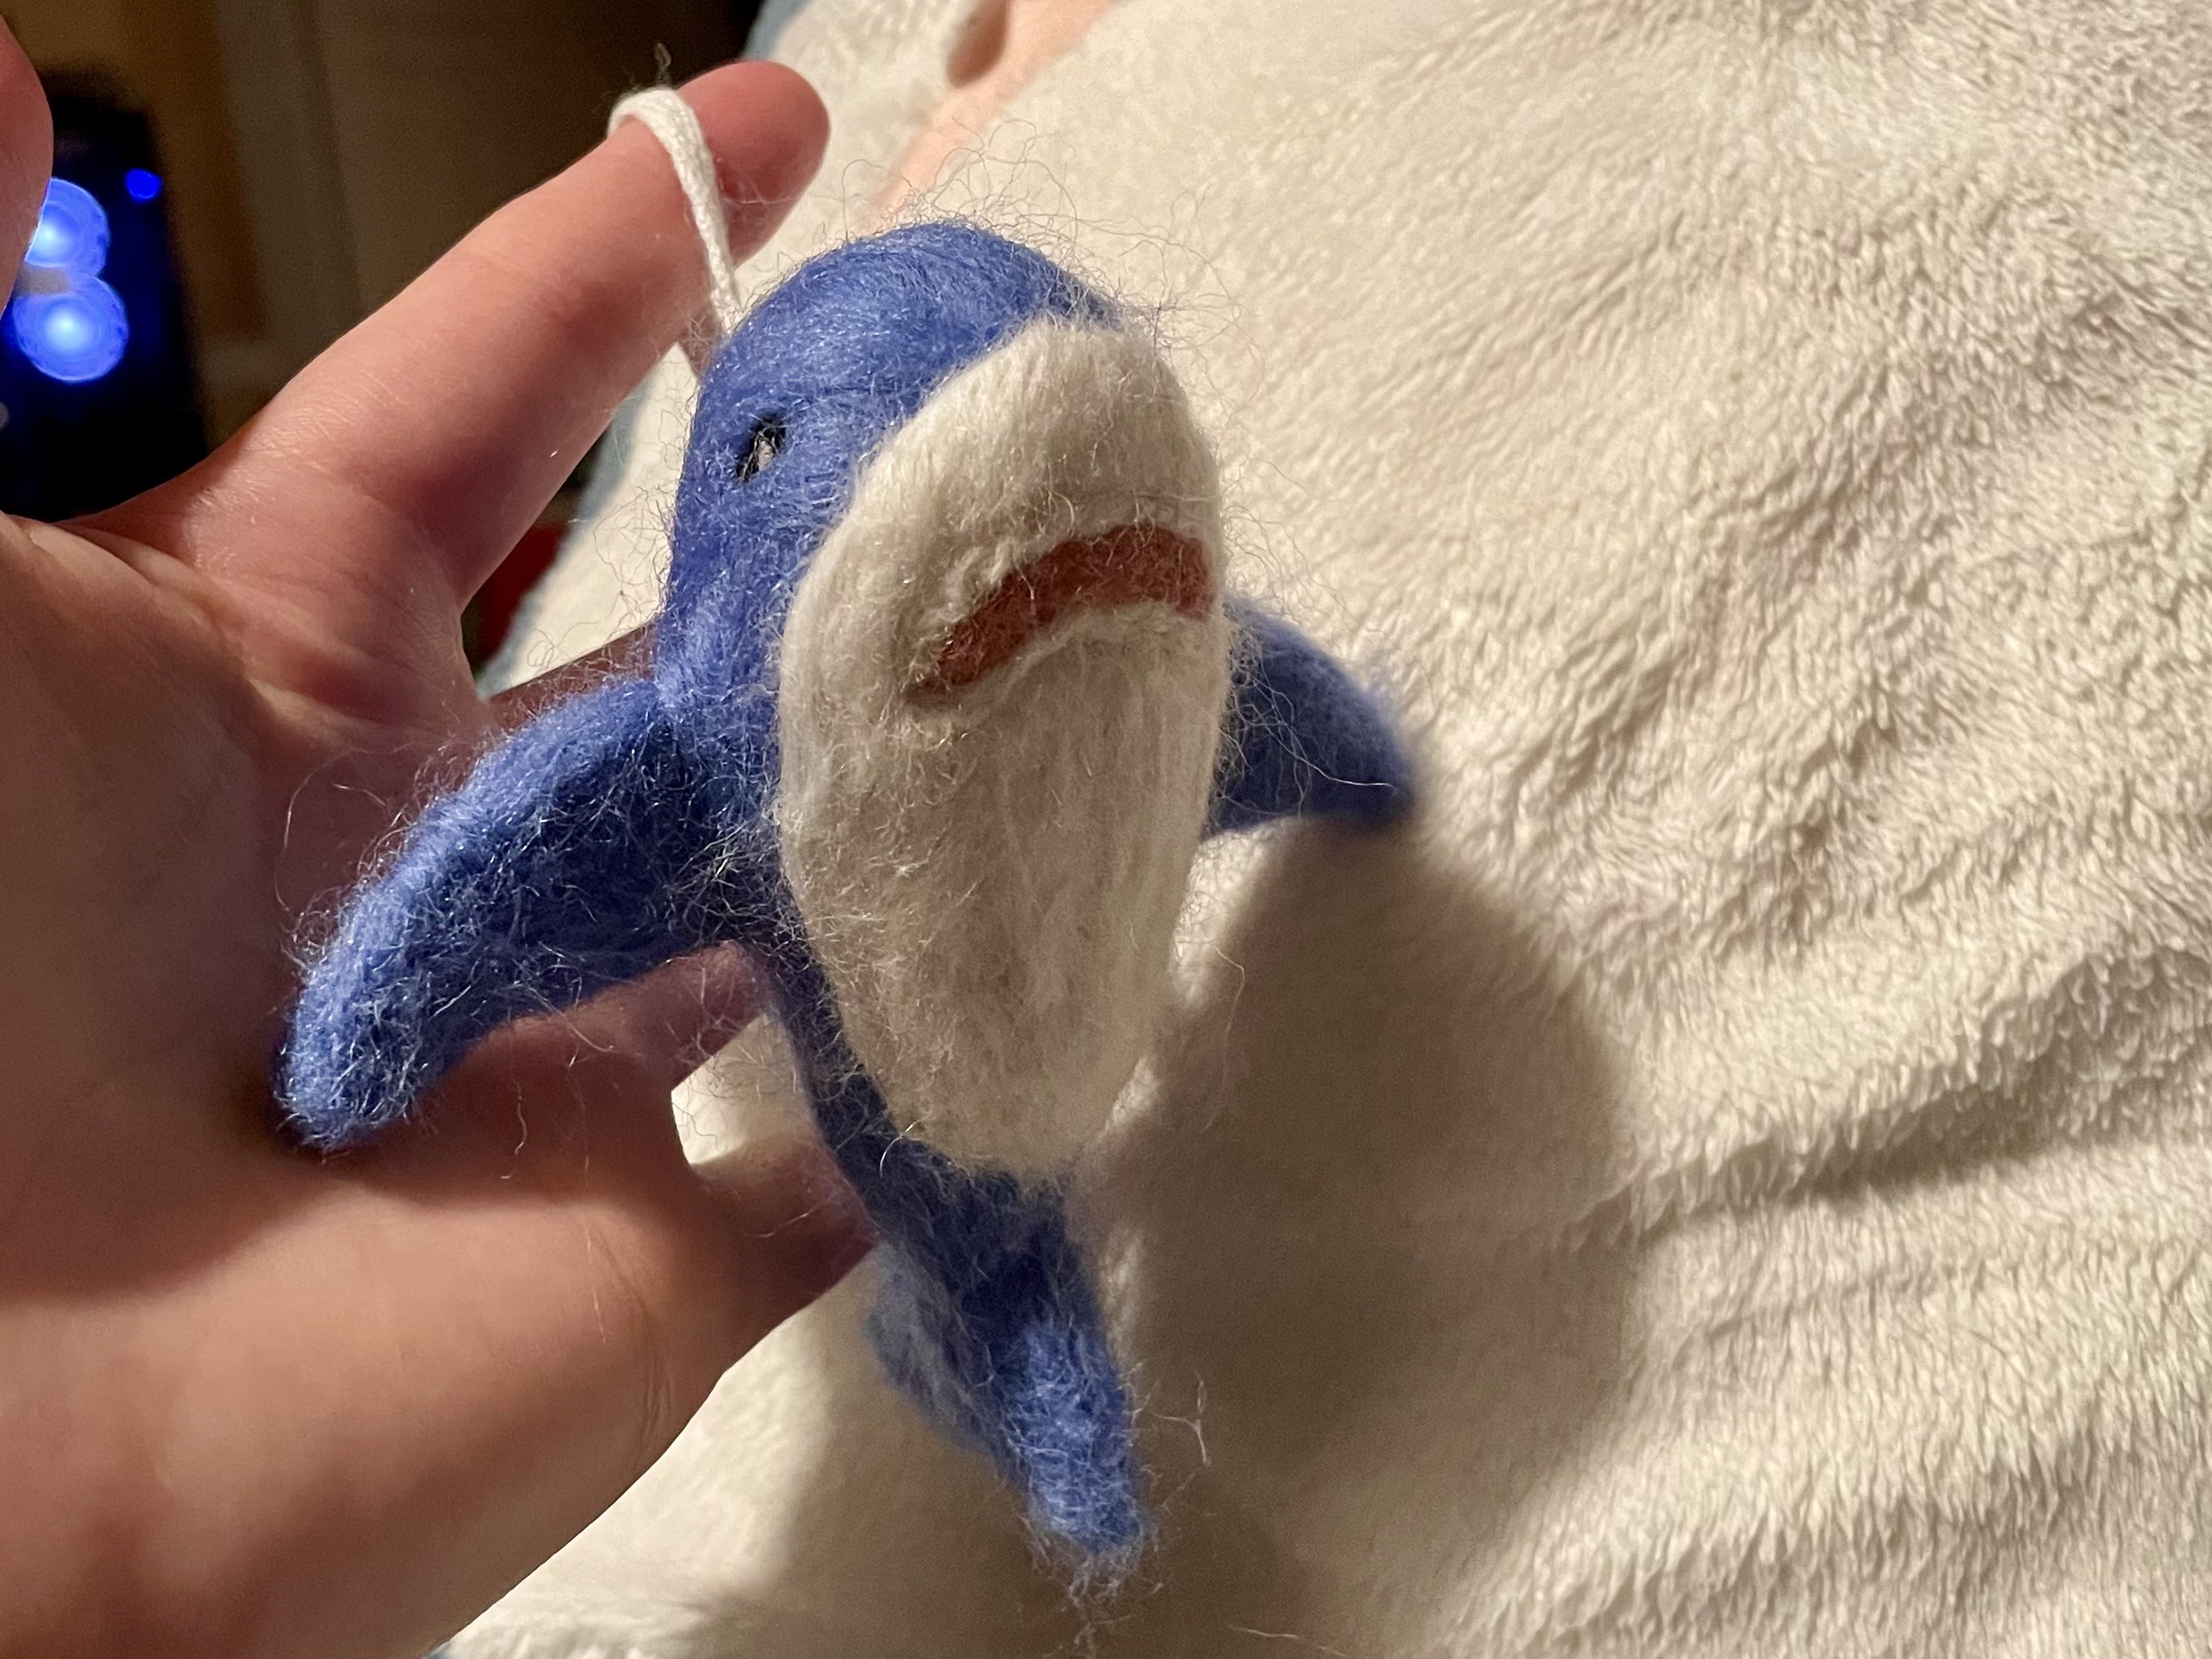 A small blue IKEA shark, known as Blåhaj, made out of wool, hanging on a string in front of its large counterpart.